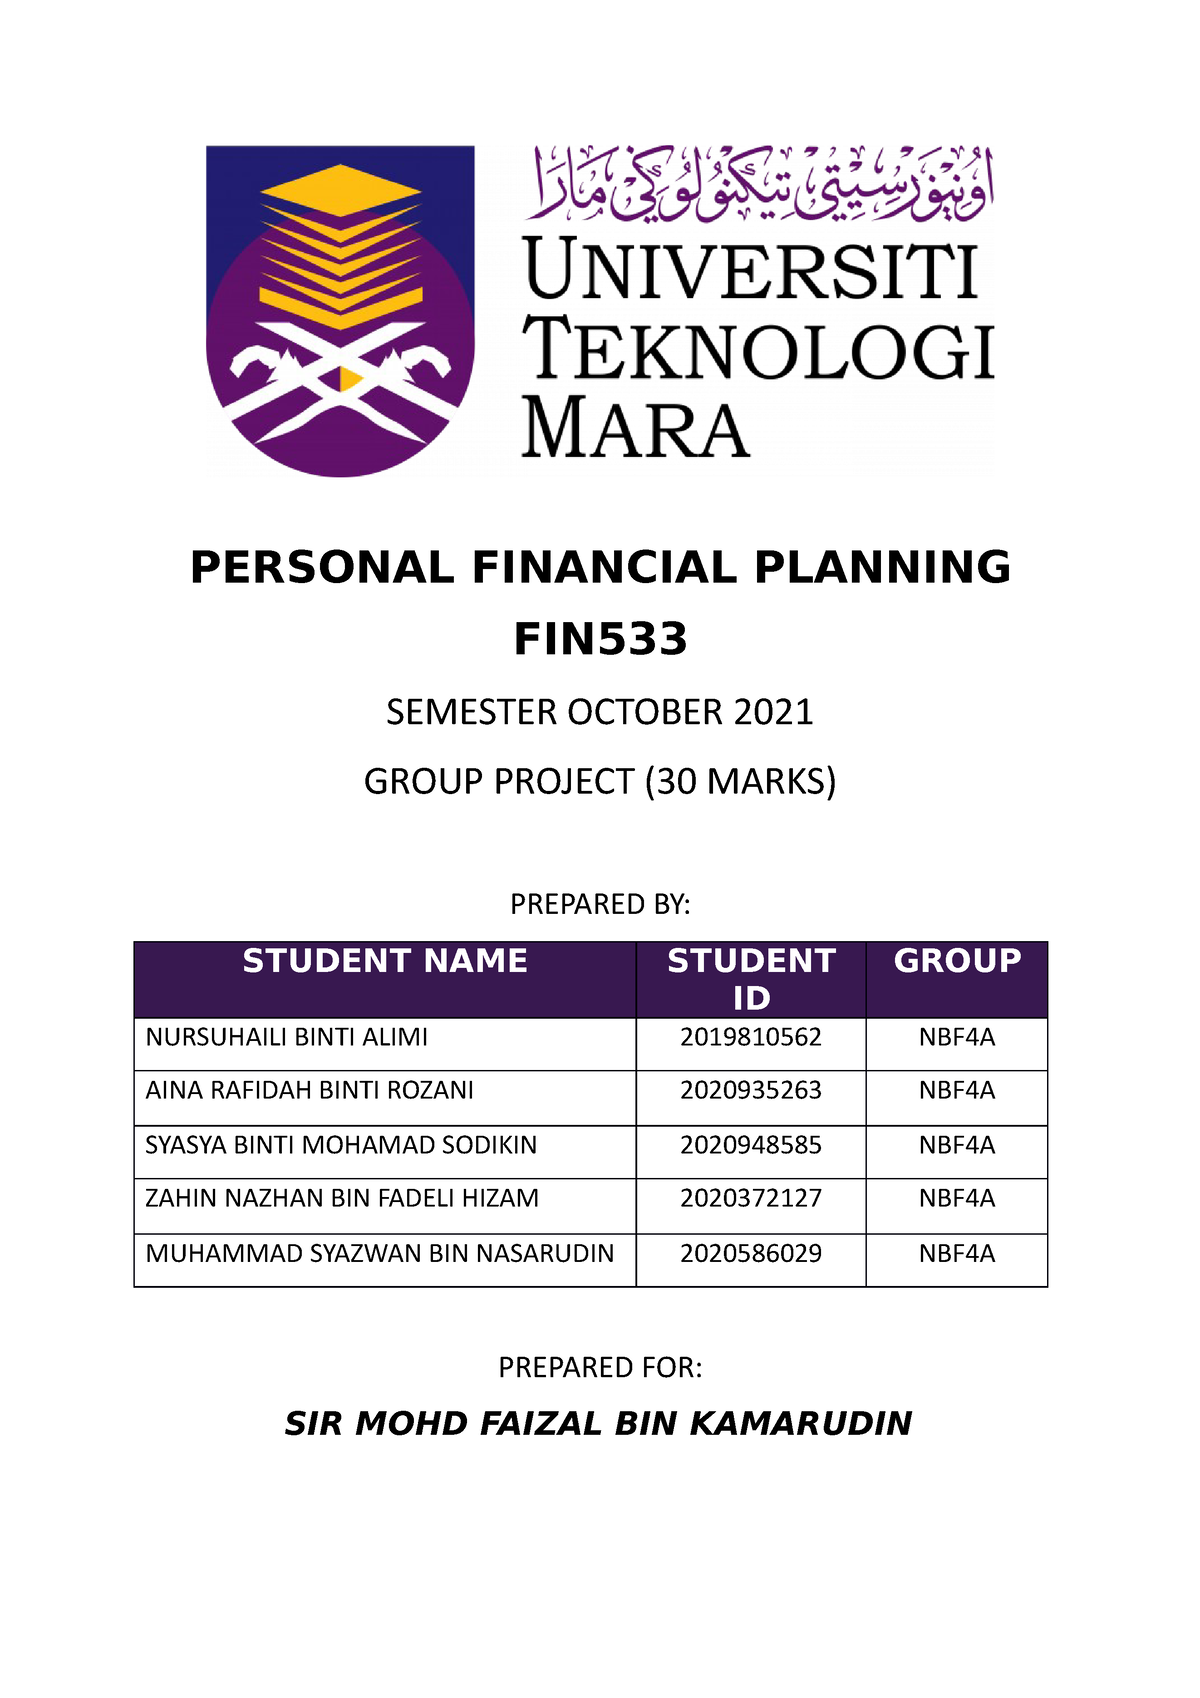 fin533 group assignment